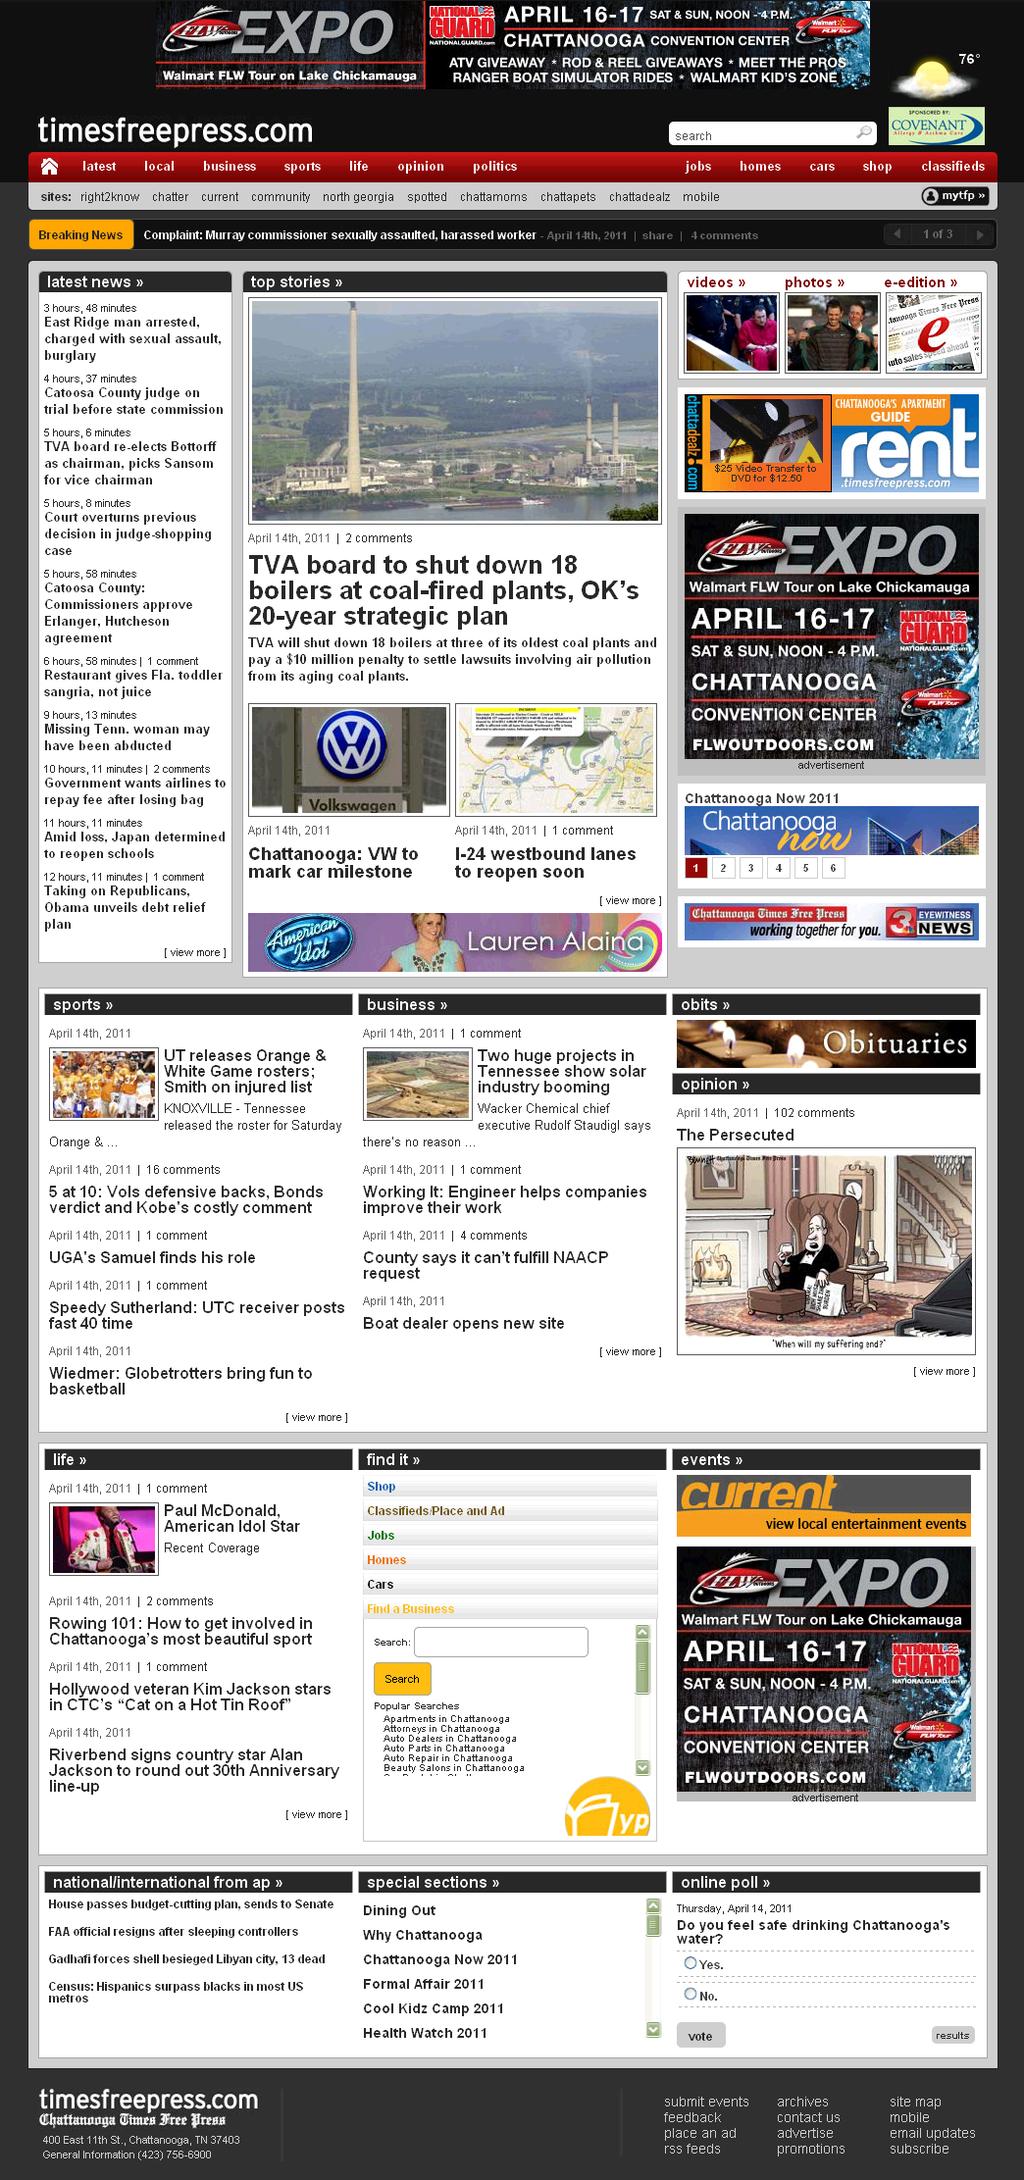 executive summary The Chattanooga Times Free Press website and mobile editions have evolved into a true online experience, allowing the user to interact and immerse themselves in Breaking news Video